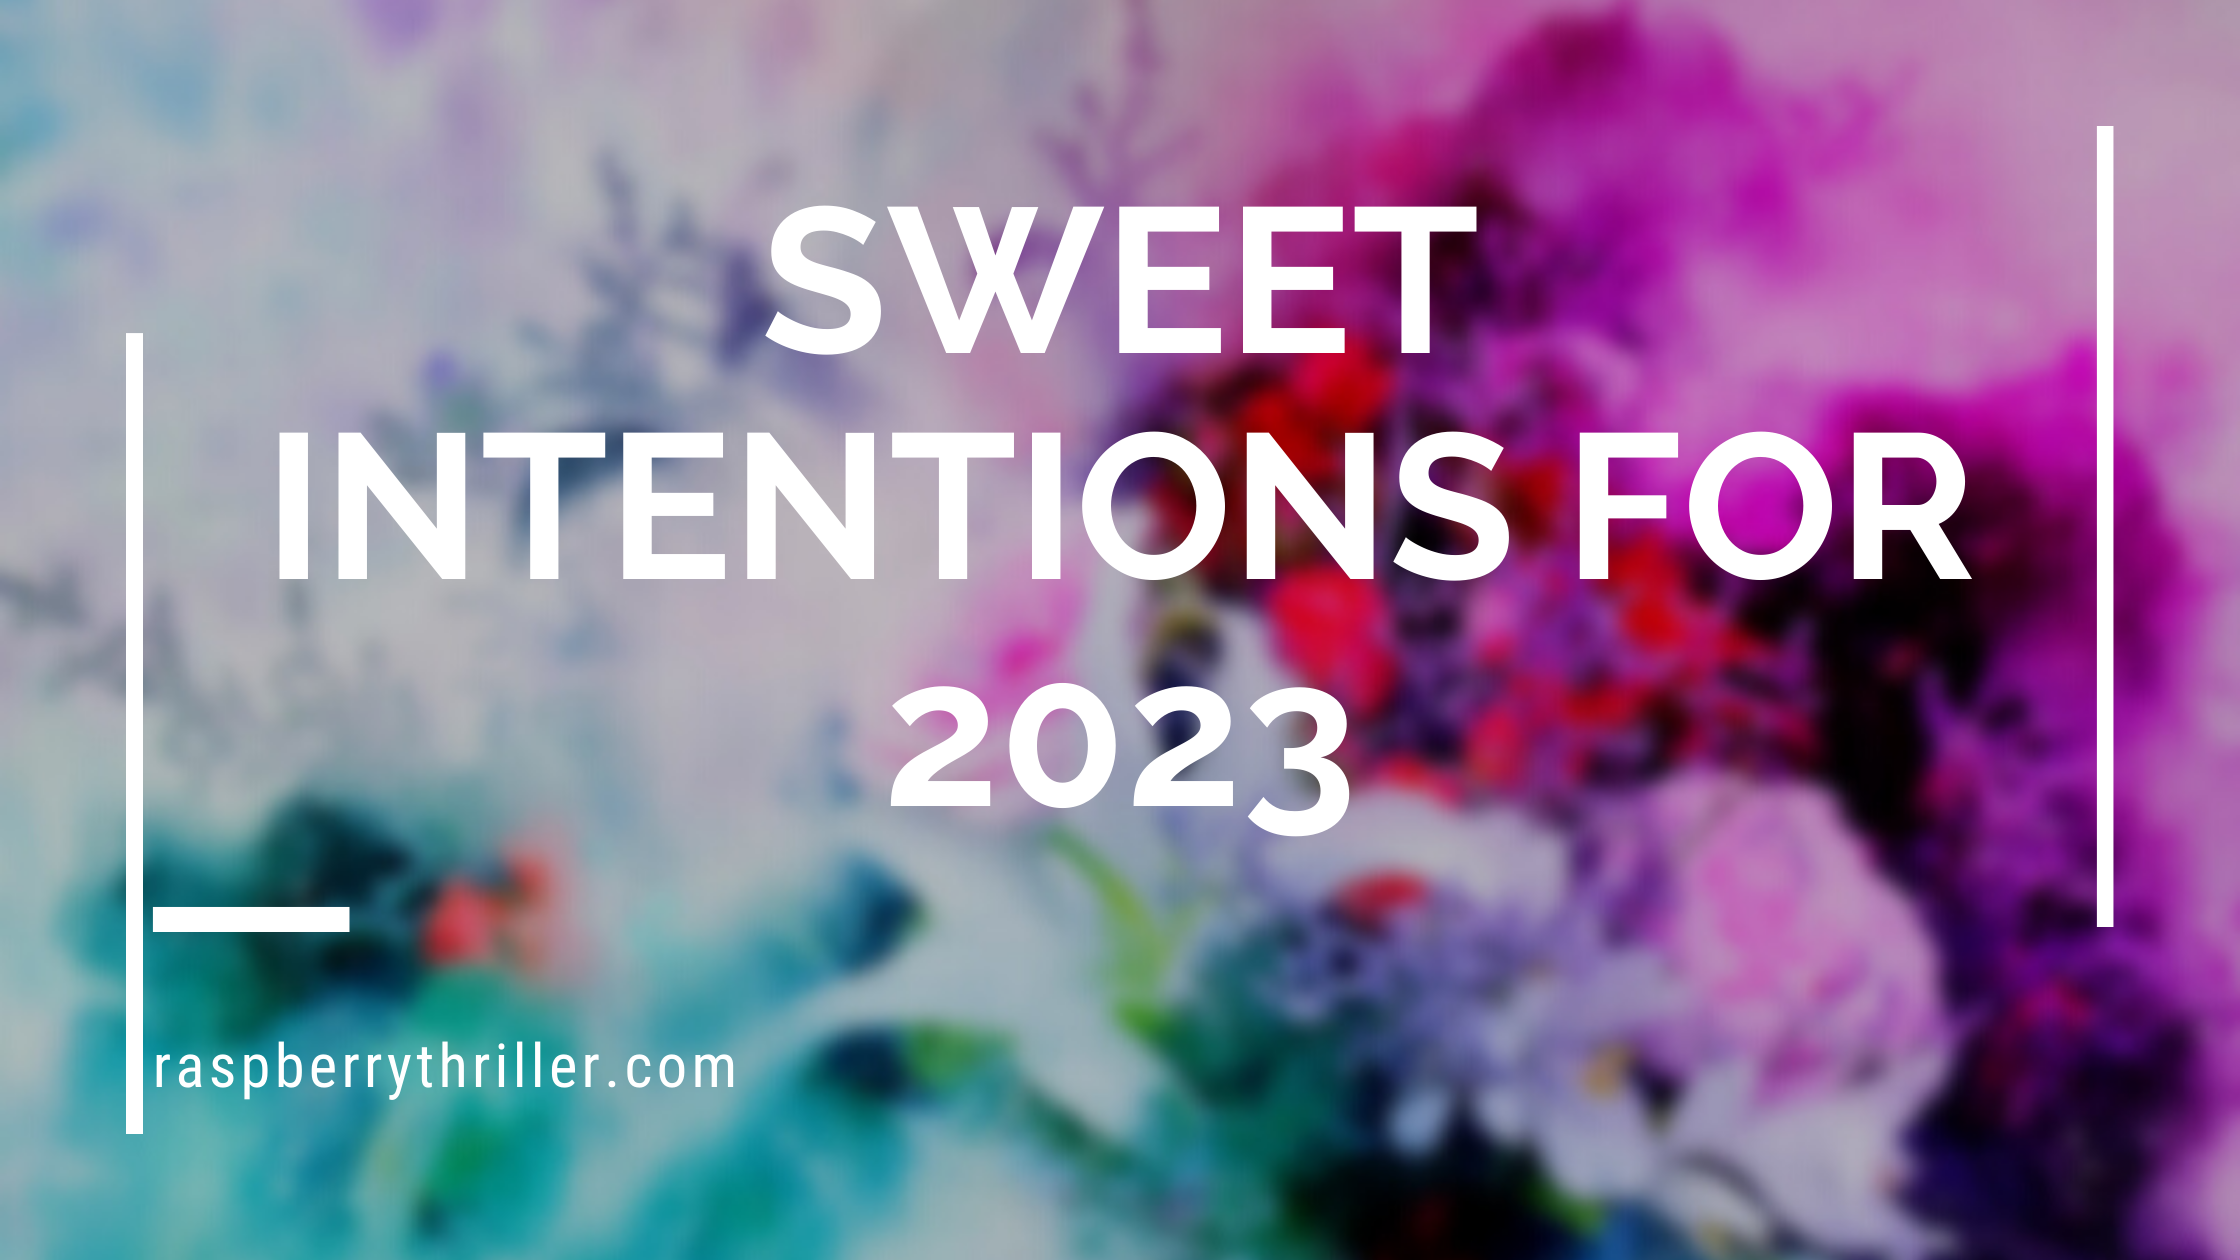 Sweet Intentions for 2023